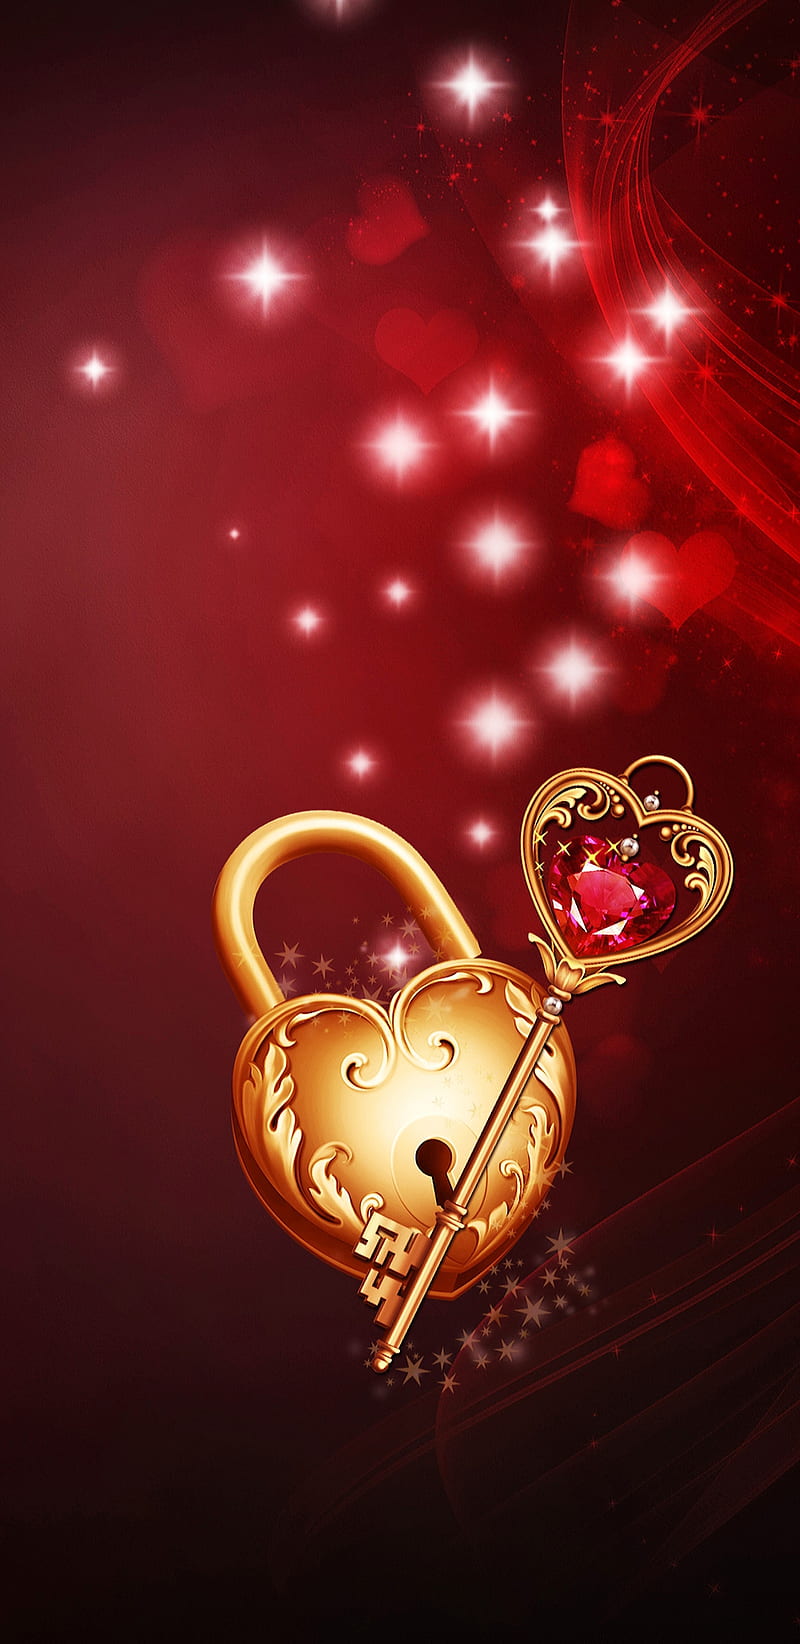 Valentine's Day Pink Heart Wallpapers — Gathering Beauty